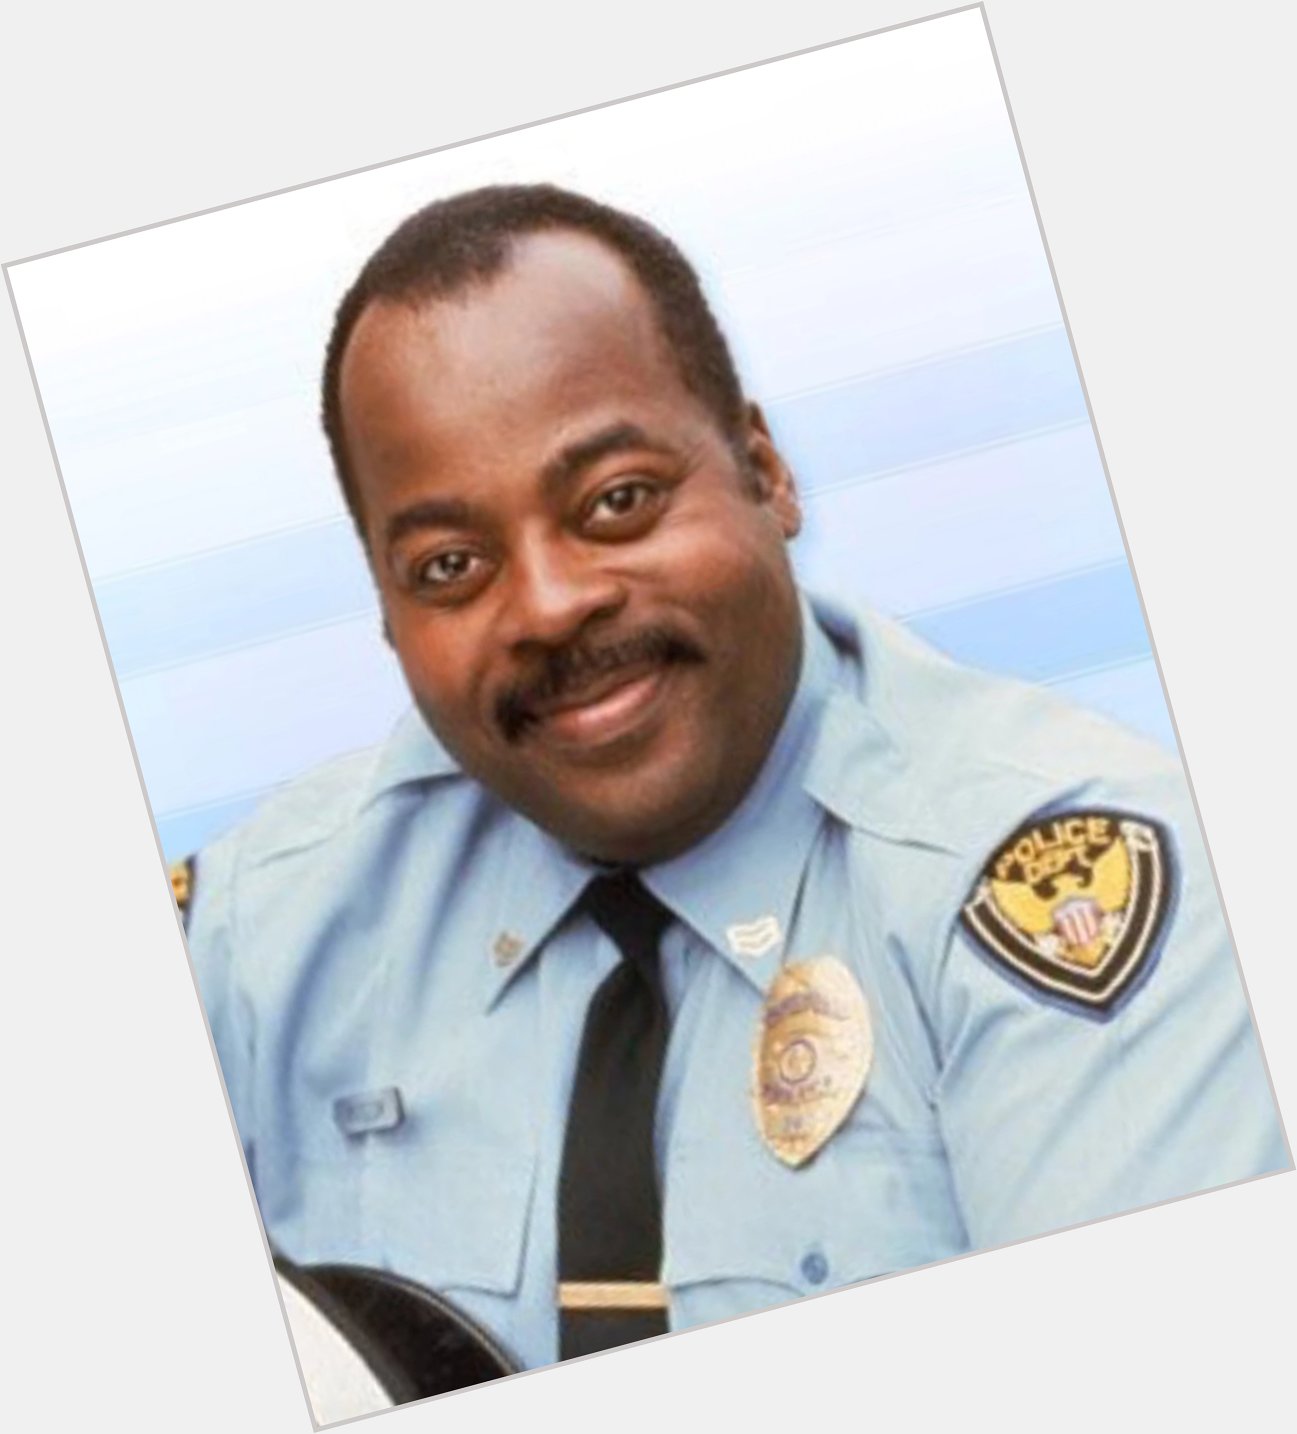 Please take a moment today to wish Reginald VelJohnson and nice and happy 69th birthday. 